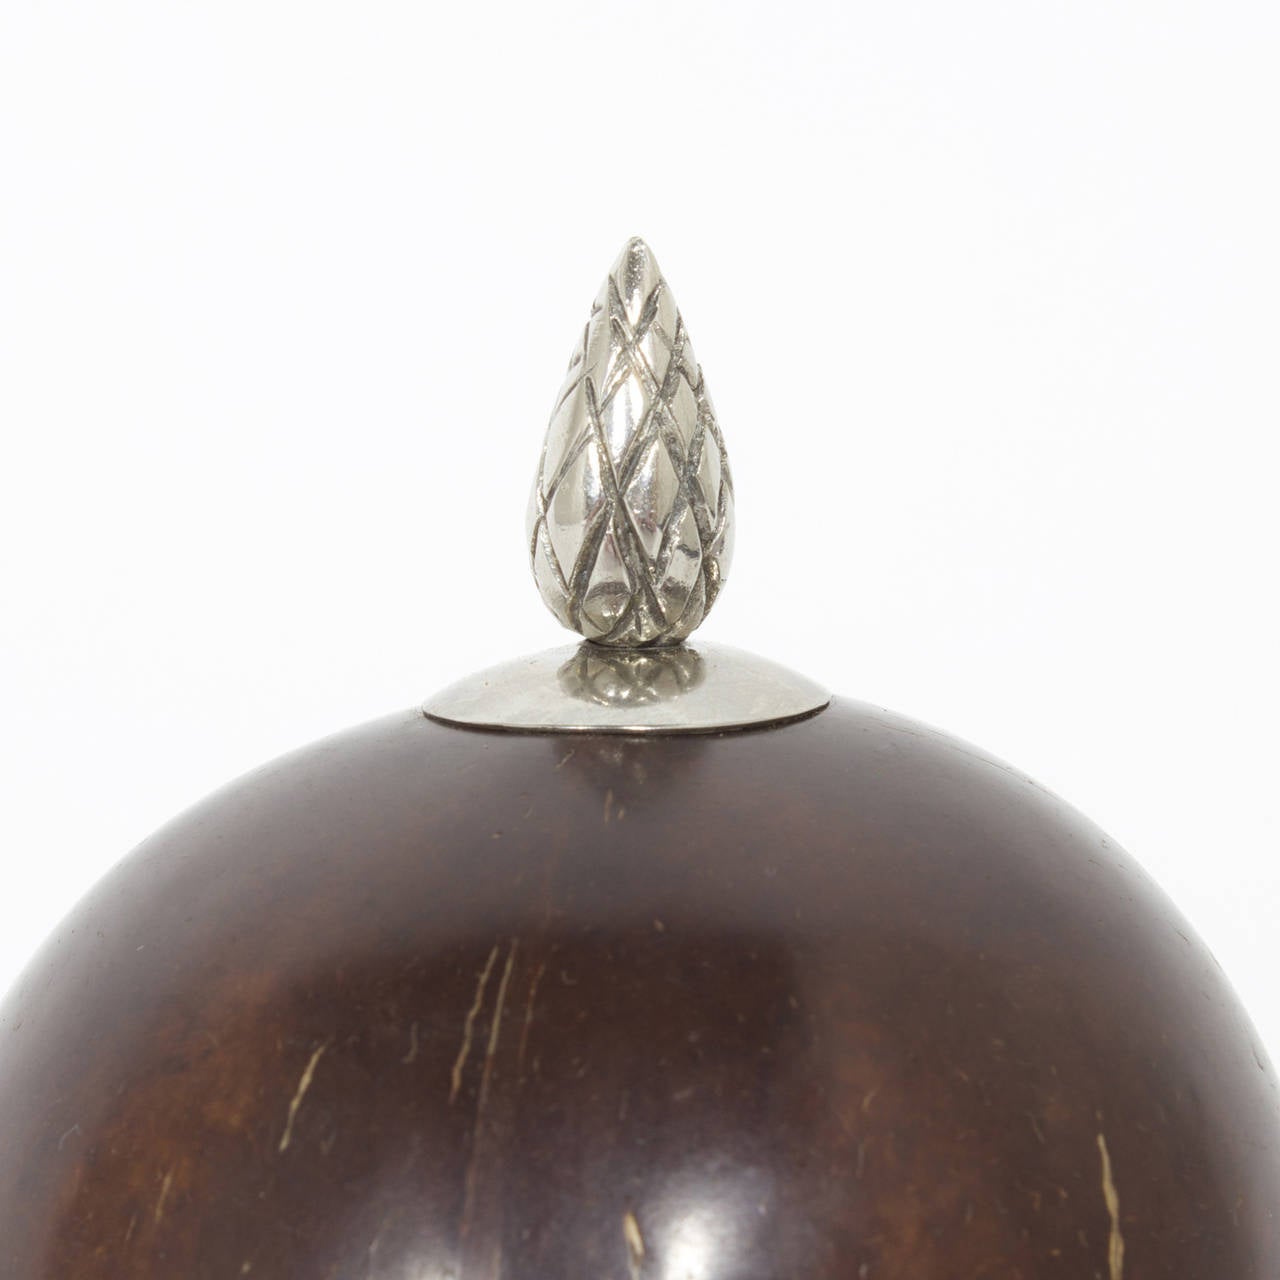 Chocolate colored coconut box decorated with finely crafted silvered metal work, including pineapple finial, bracelet style twisted rope cuffs with a jewelry type catch, all mounted on a goblet style base. Interior is finished to complete the